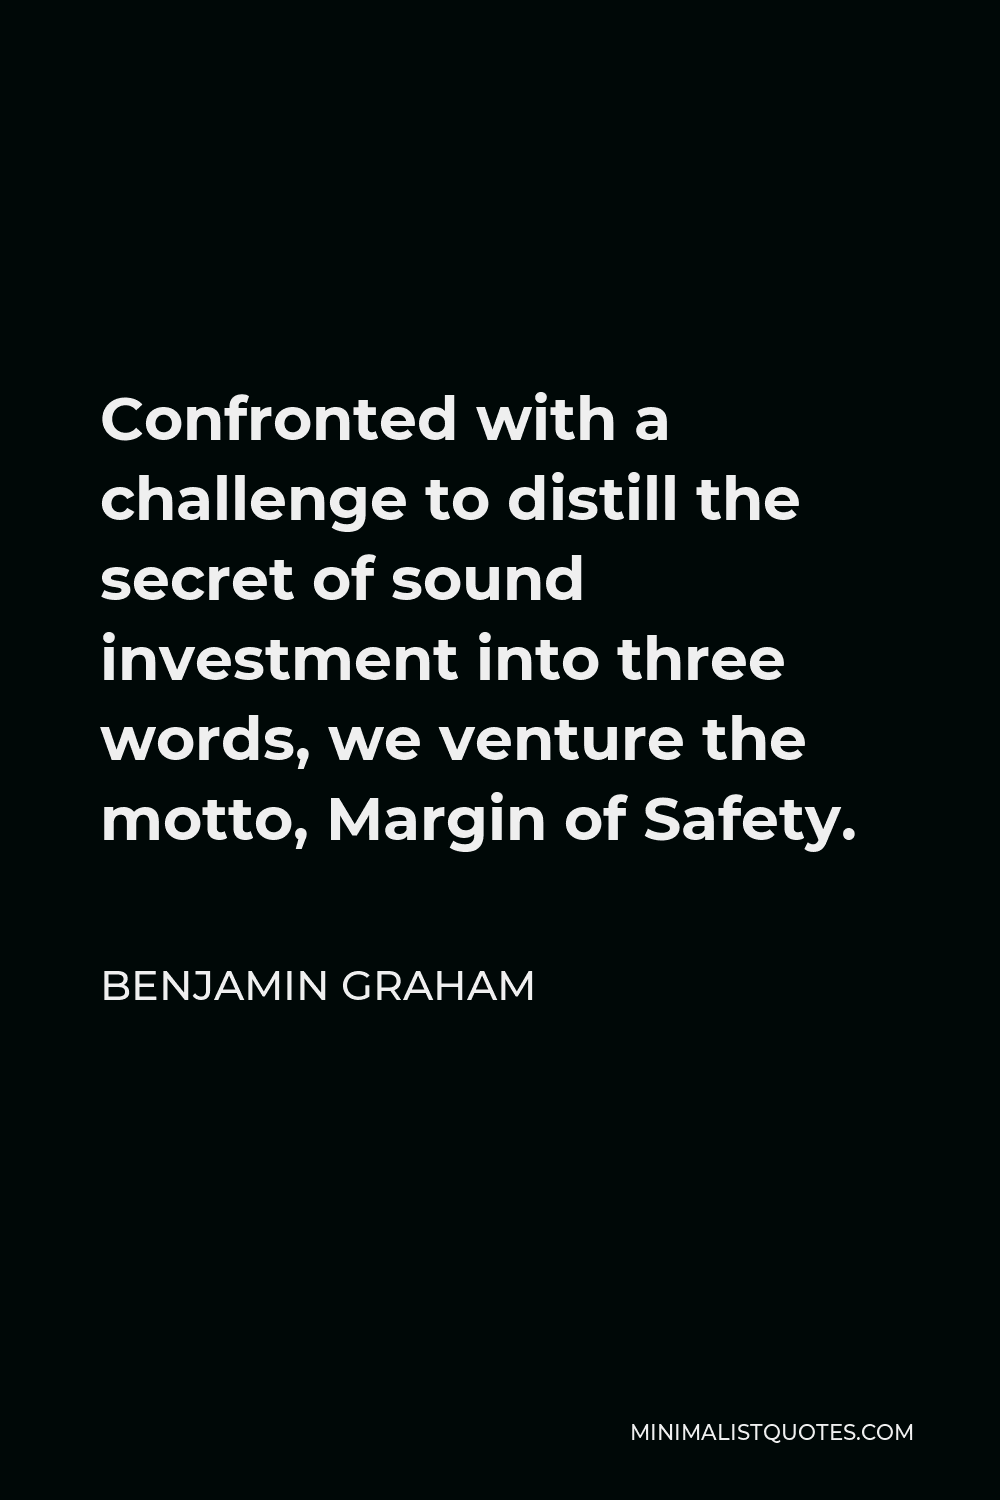 Benjamin Graham Quote - Confronted with a challenge to distill the secret of sound investment into three words, we venture the motto, Margin of Safety.